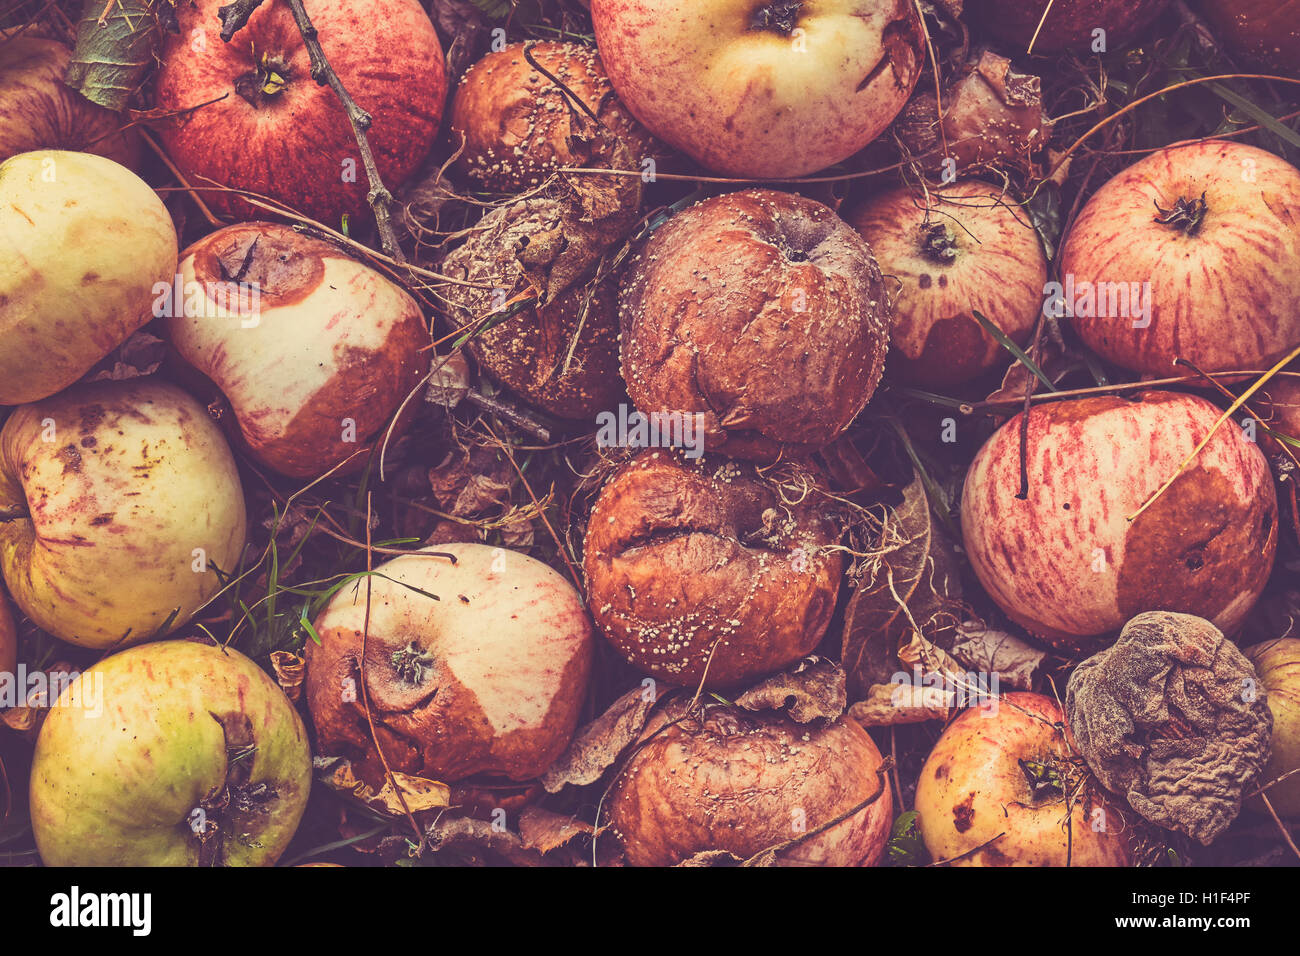 Retro toned close up picture of rotten apples in a garden. Stock Photo